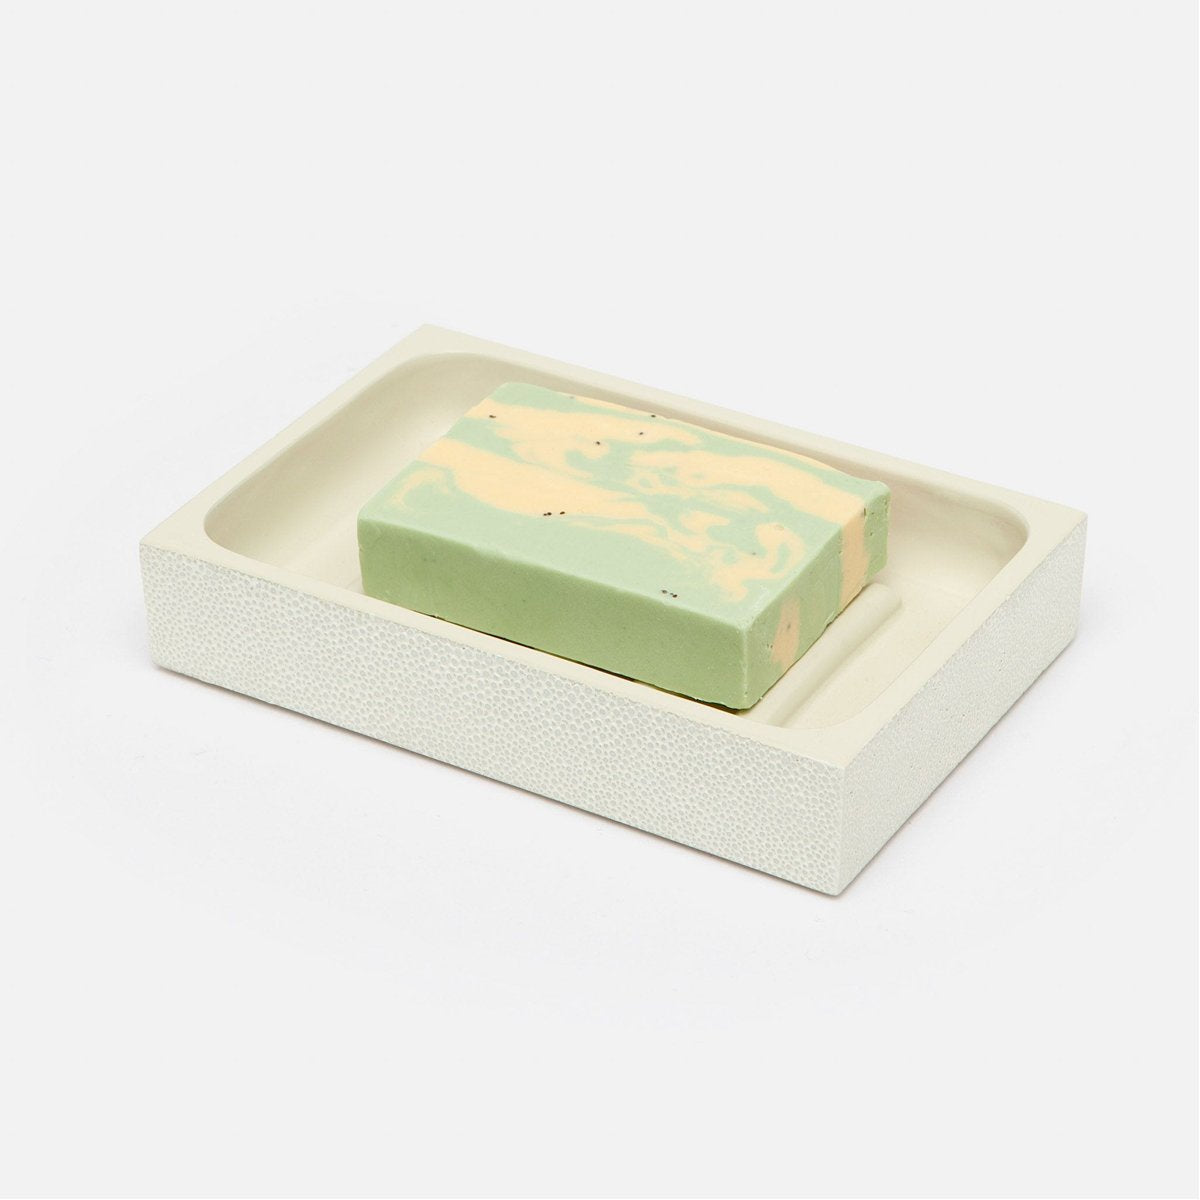 Pigeon and Poodle Manchester Rectangular Soap Dish, Straight